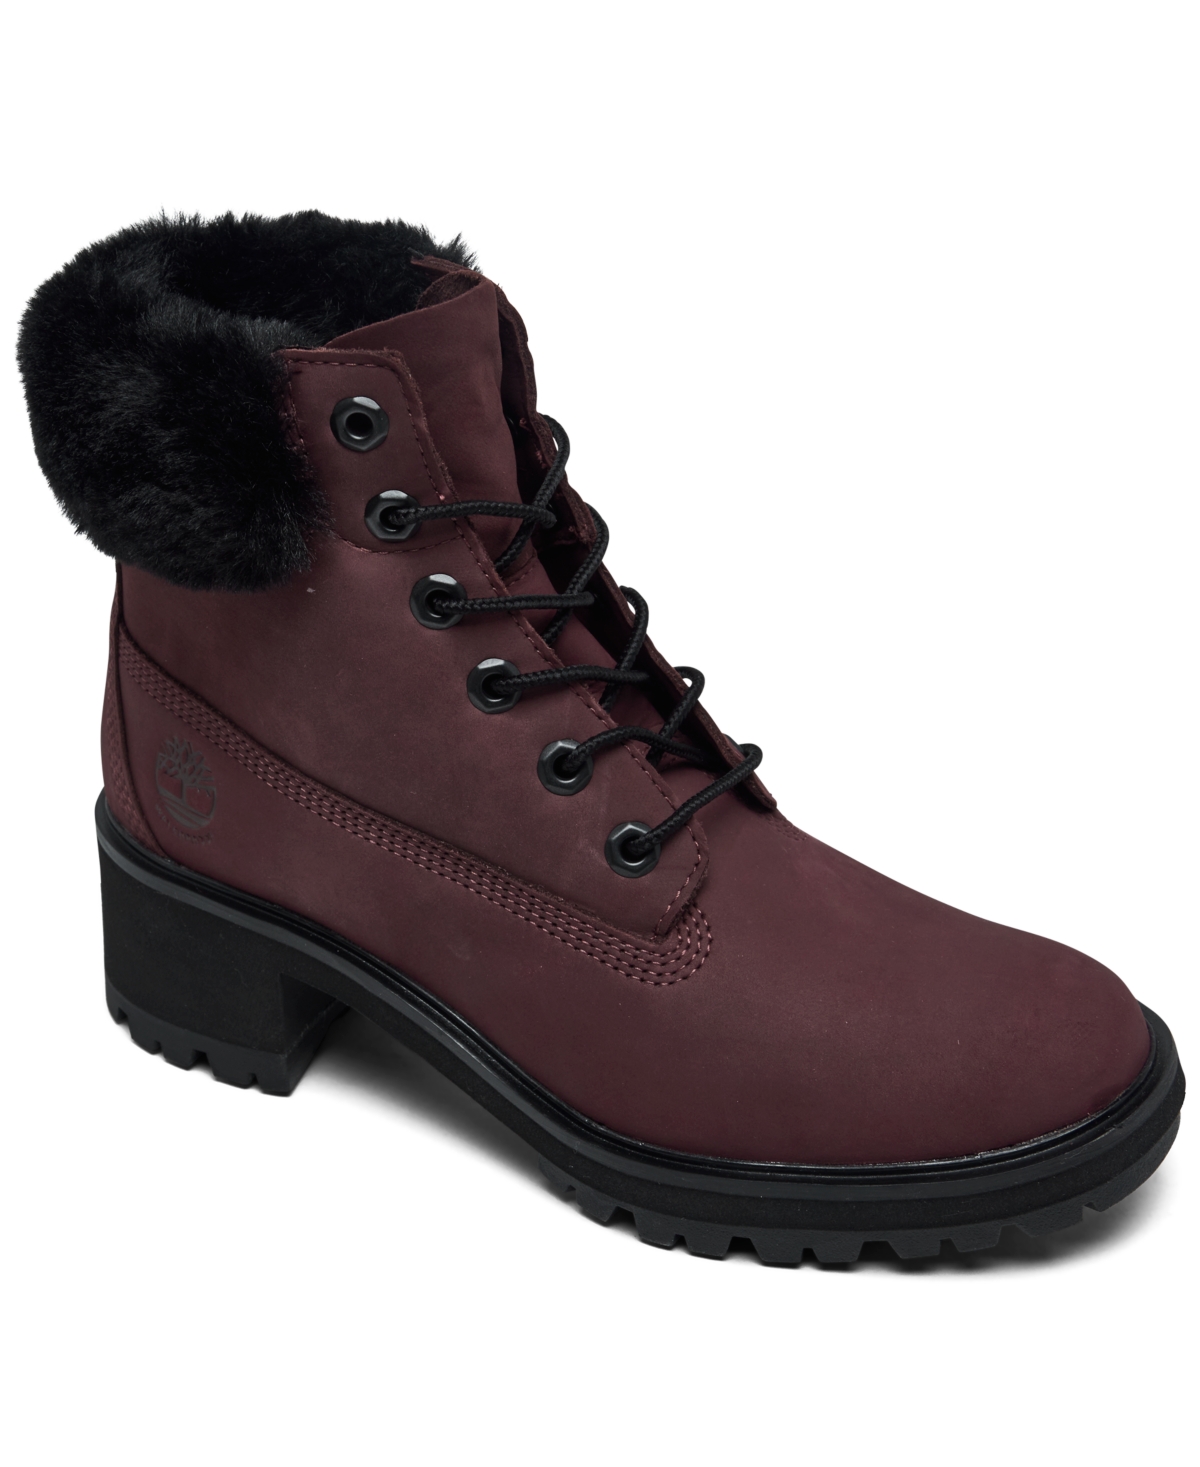 Timberland Women's Kinsley 6" Water-resistant Boots From Finish Line In Dark Port